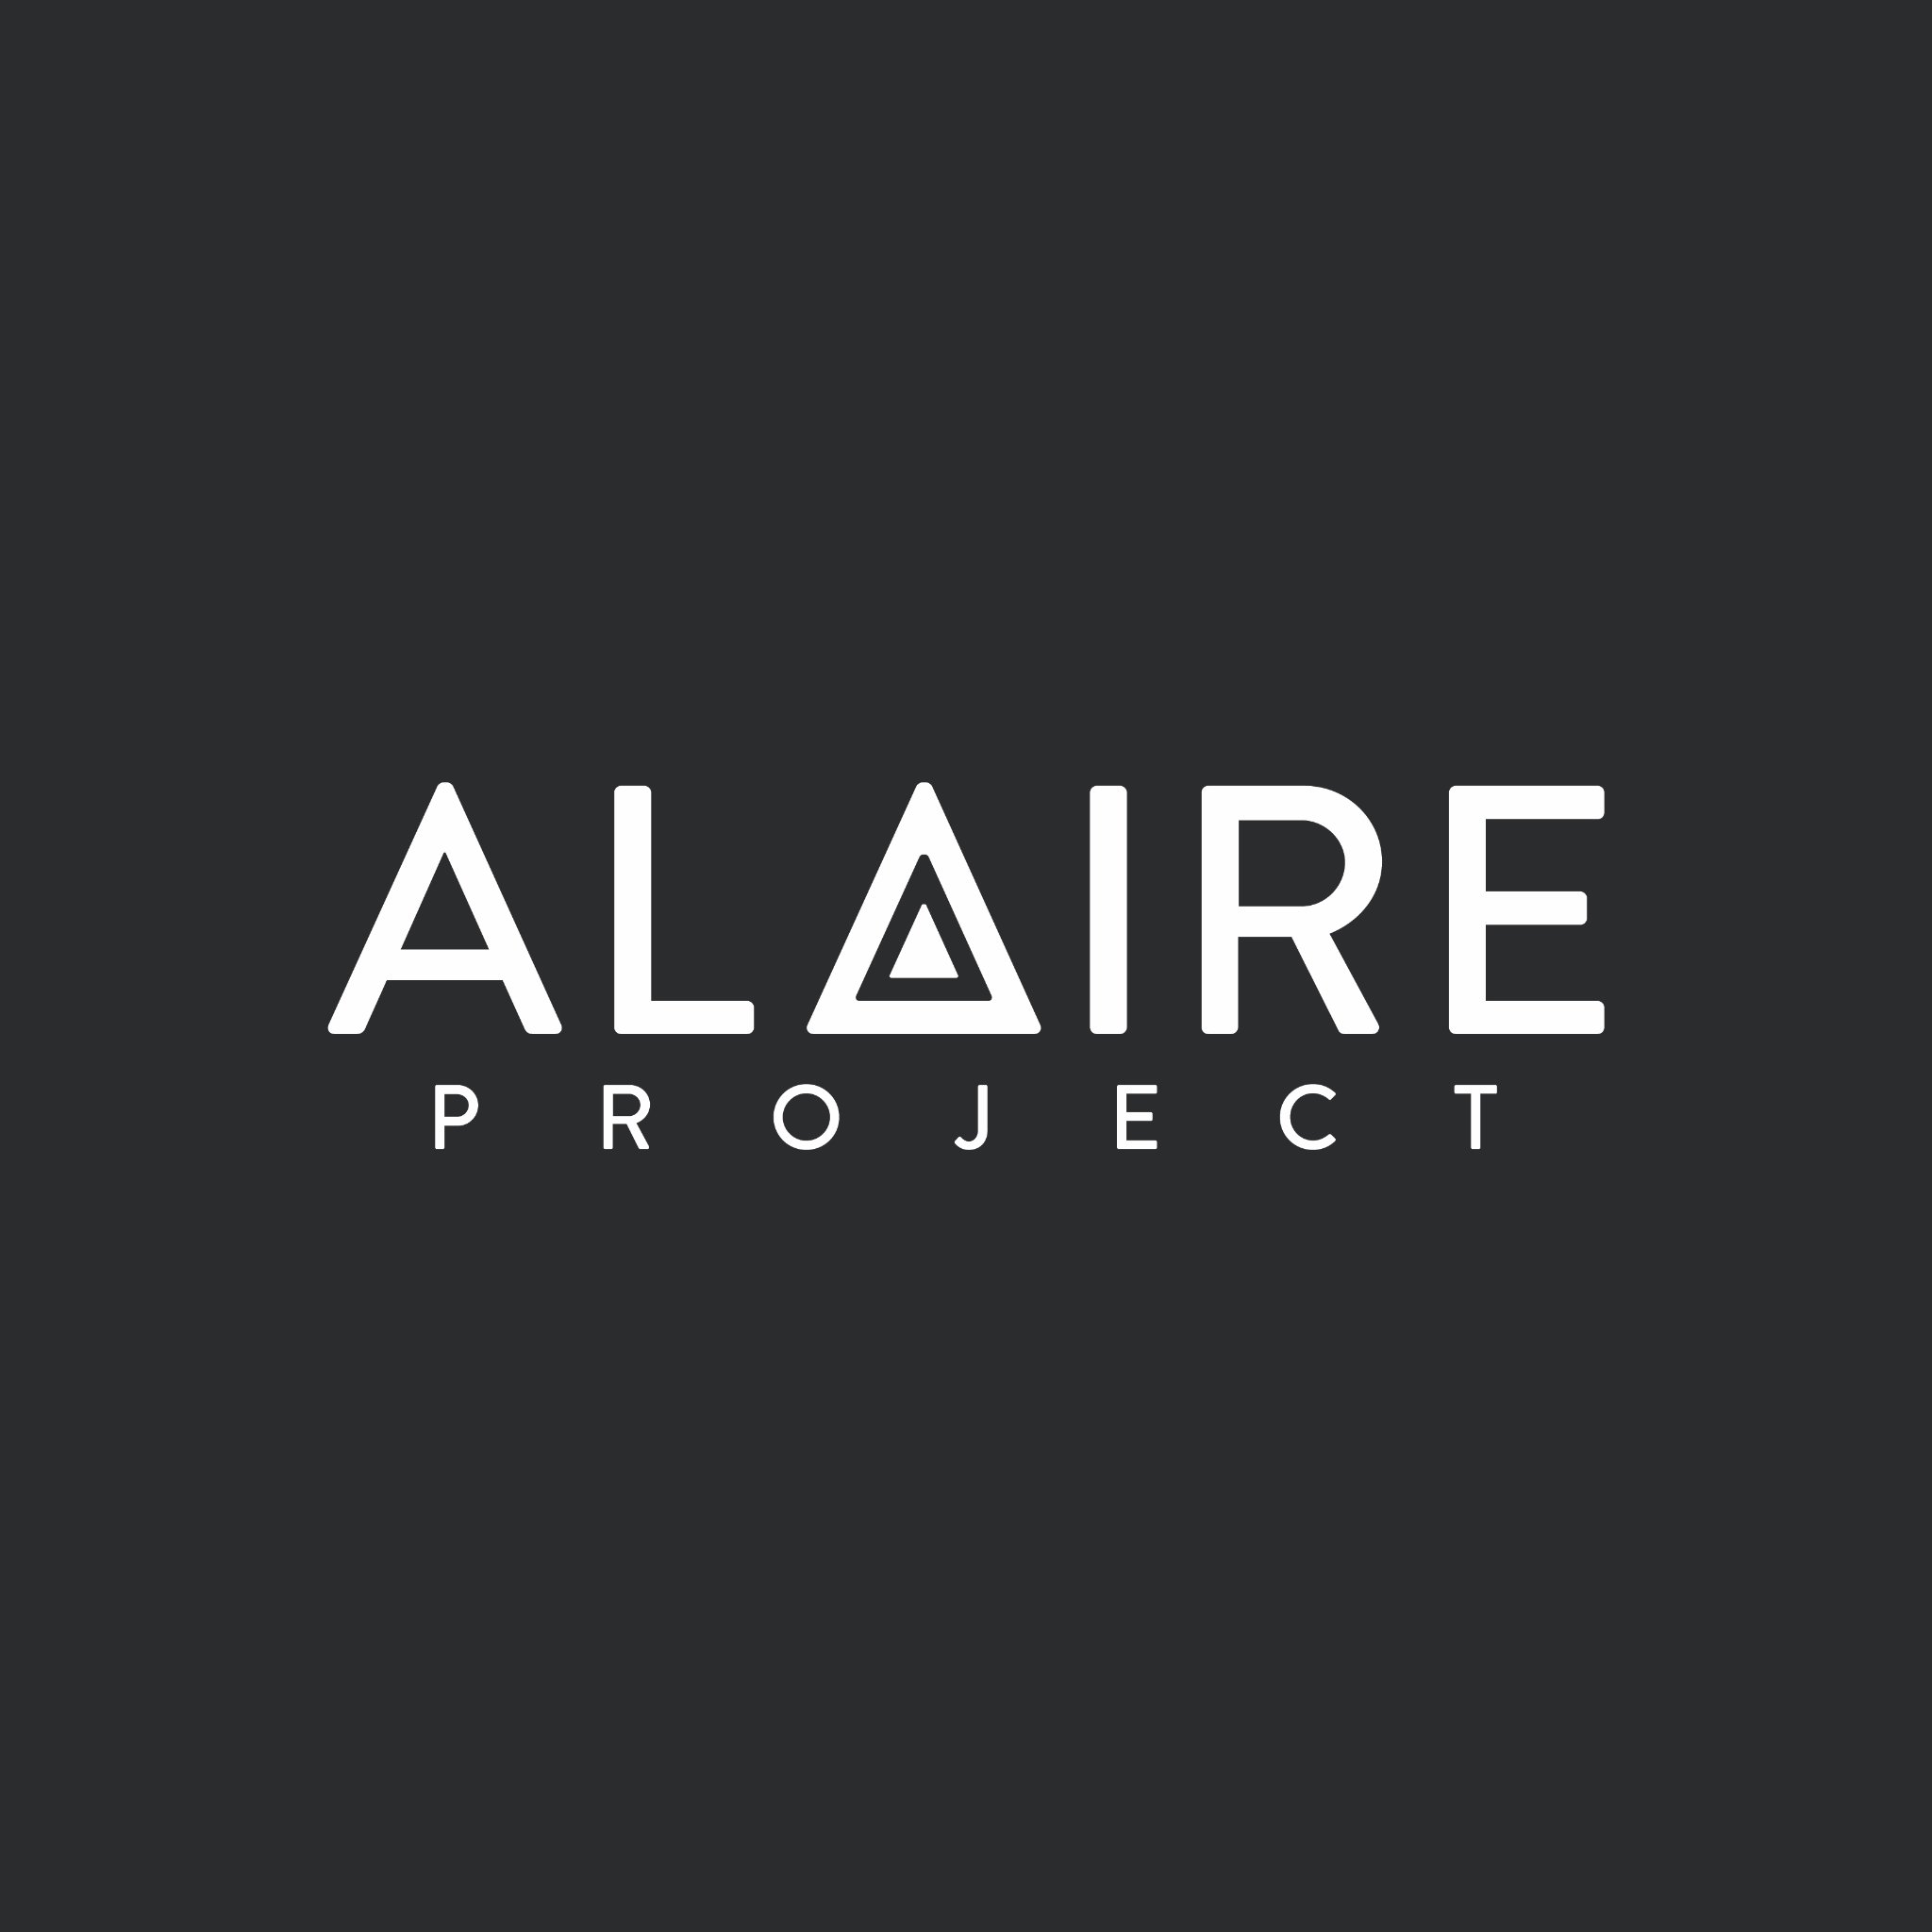 Open Service for Photography, Doc, Marriage Prop, and we specialize in creating Music Videos (Studio/ Staged/ Live music).

Contact us : Alaireproject@gmail.com